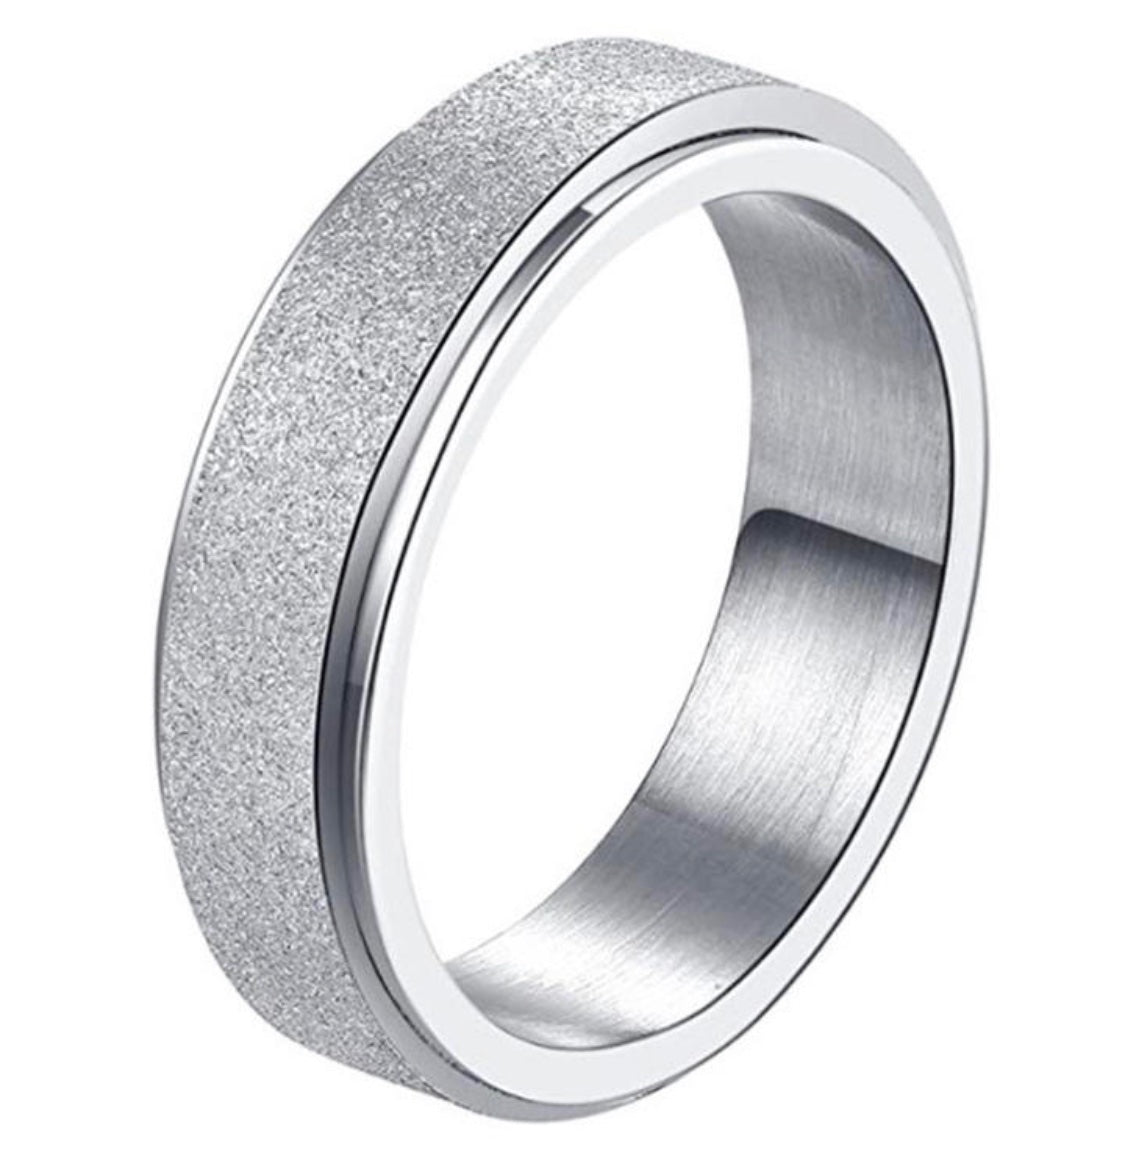 Zen Life Anxiety Spinner Ring (Oh So Silver)